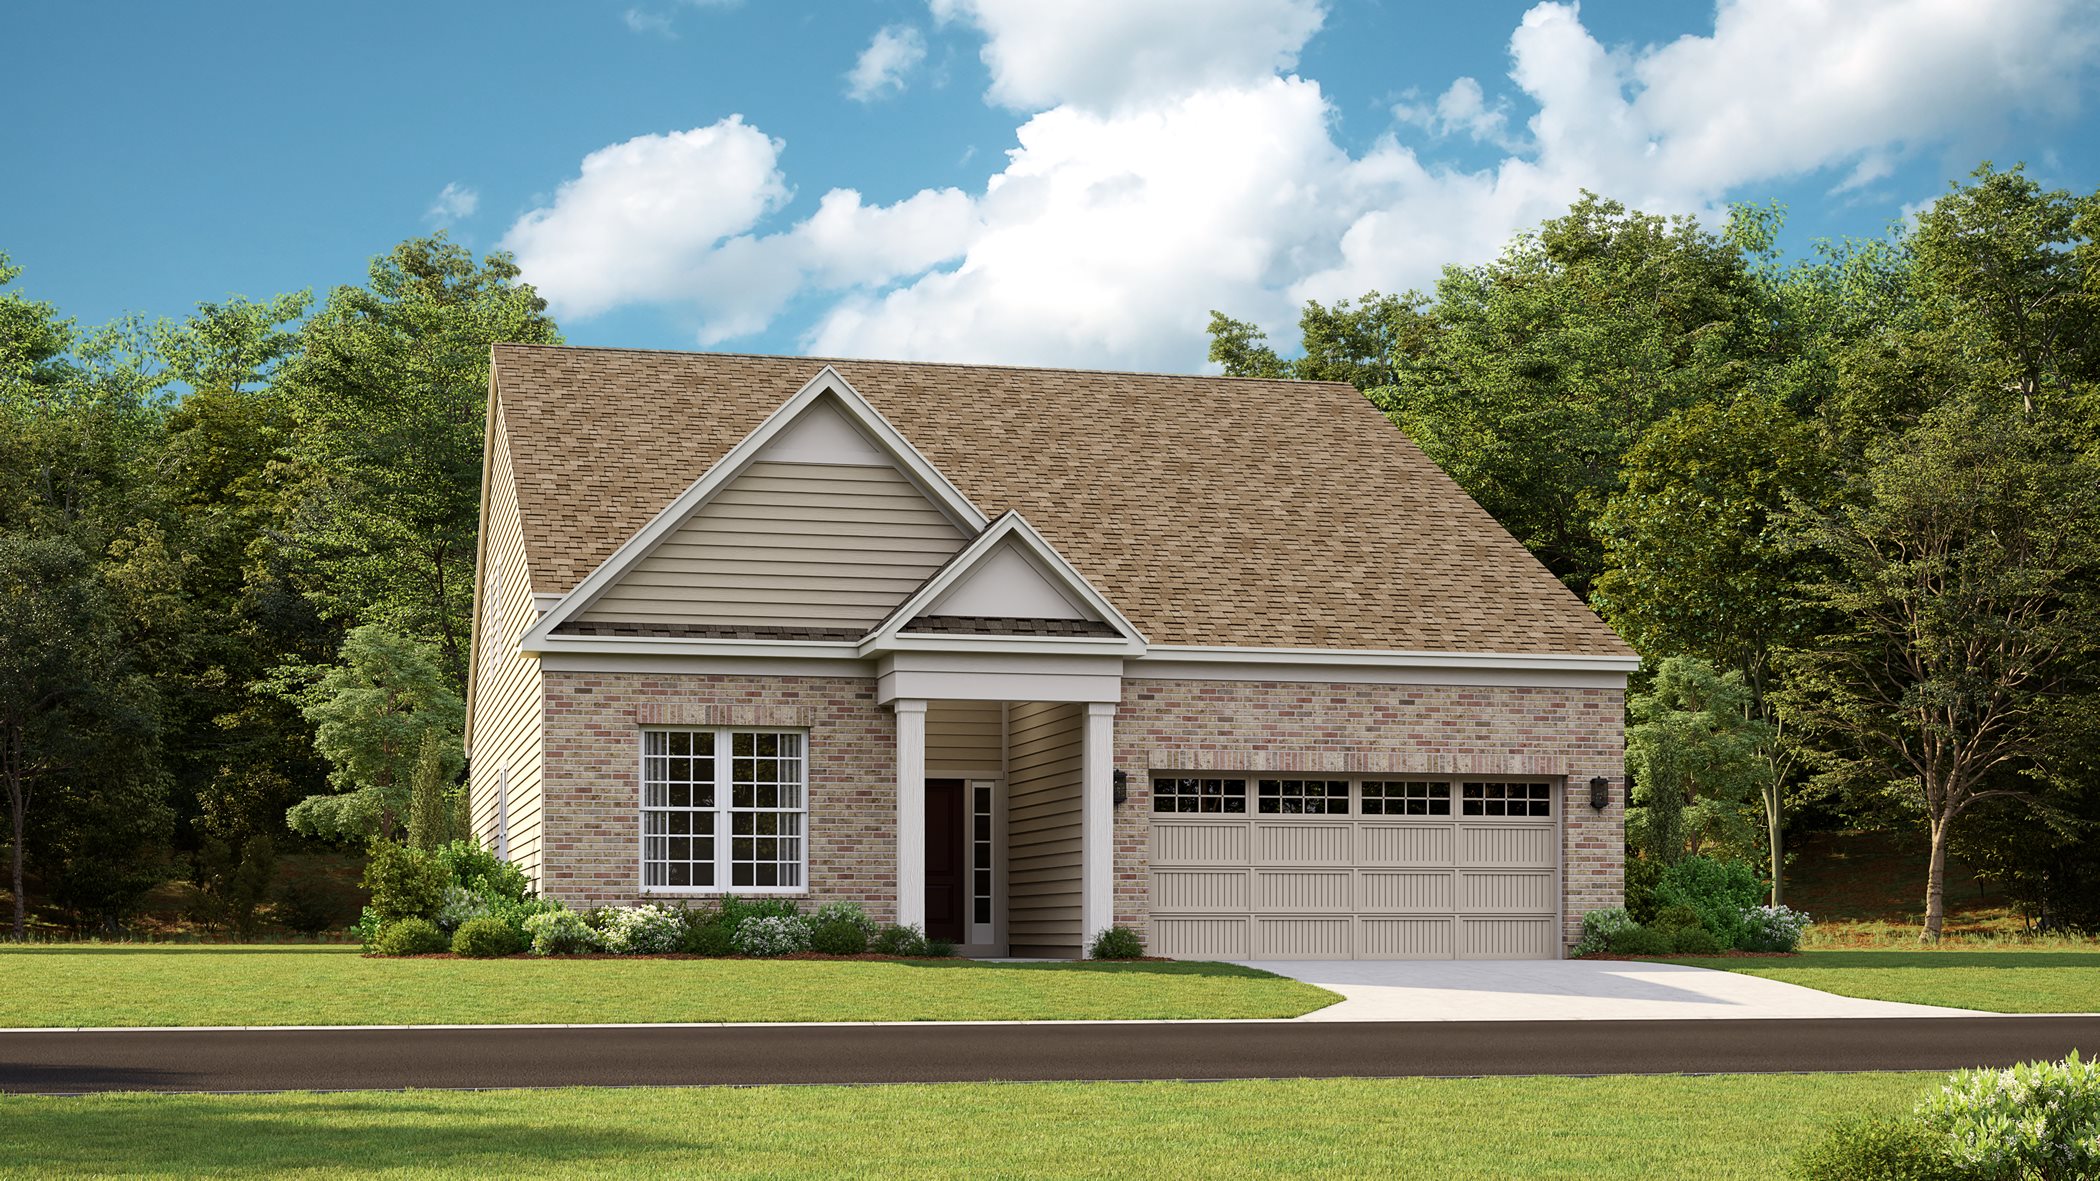 TEXT: The Captiva at Beechfield Manors IMAGE: Exterior rendering of the Captiva with brick at Beechfield Manors